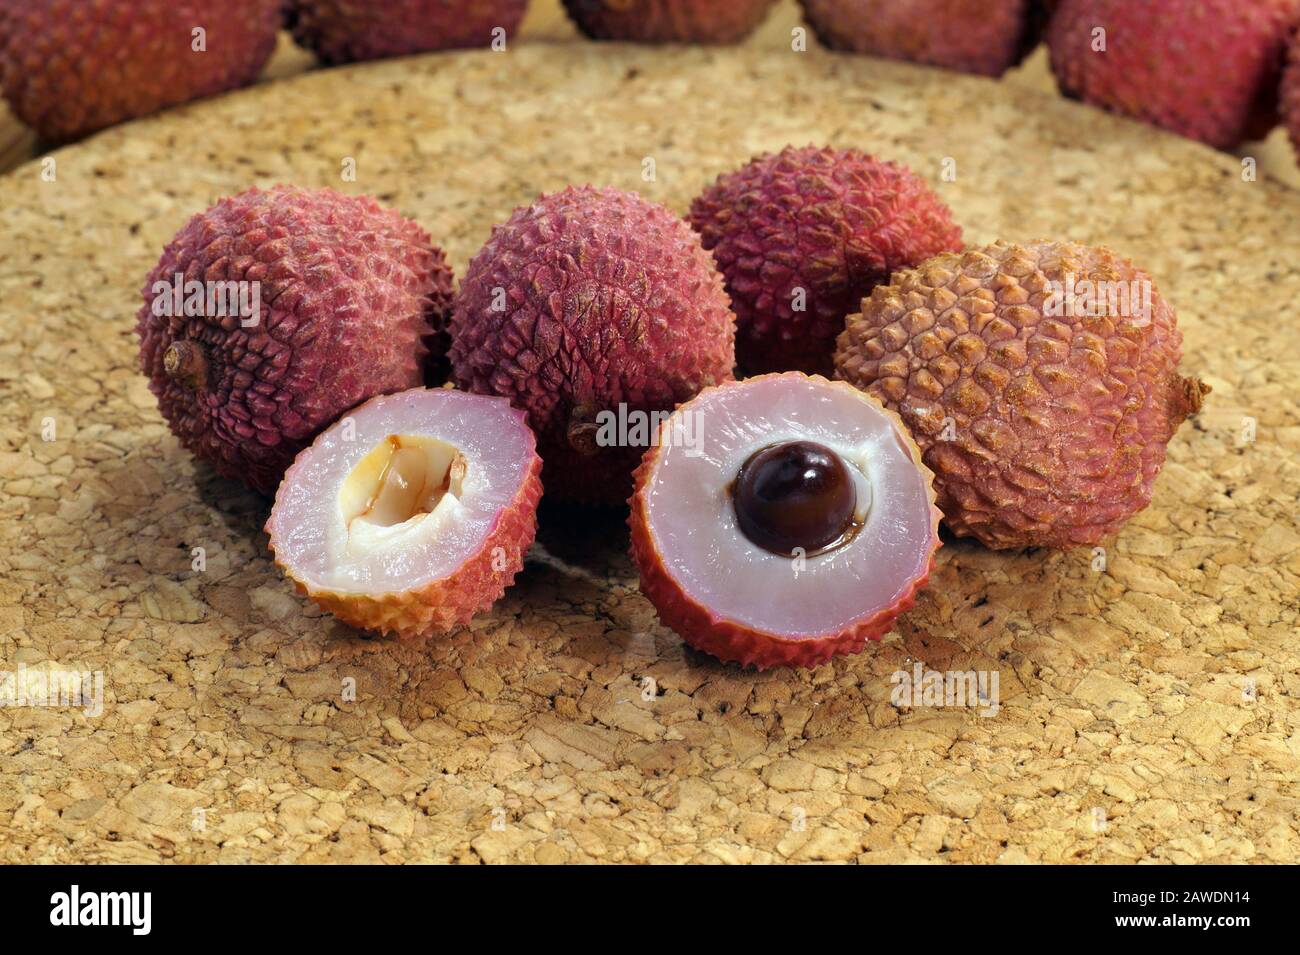 For dessert. A view of the cross-section of a lychee fruit with seed, next to whole fruits. Stock Photo